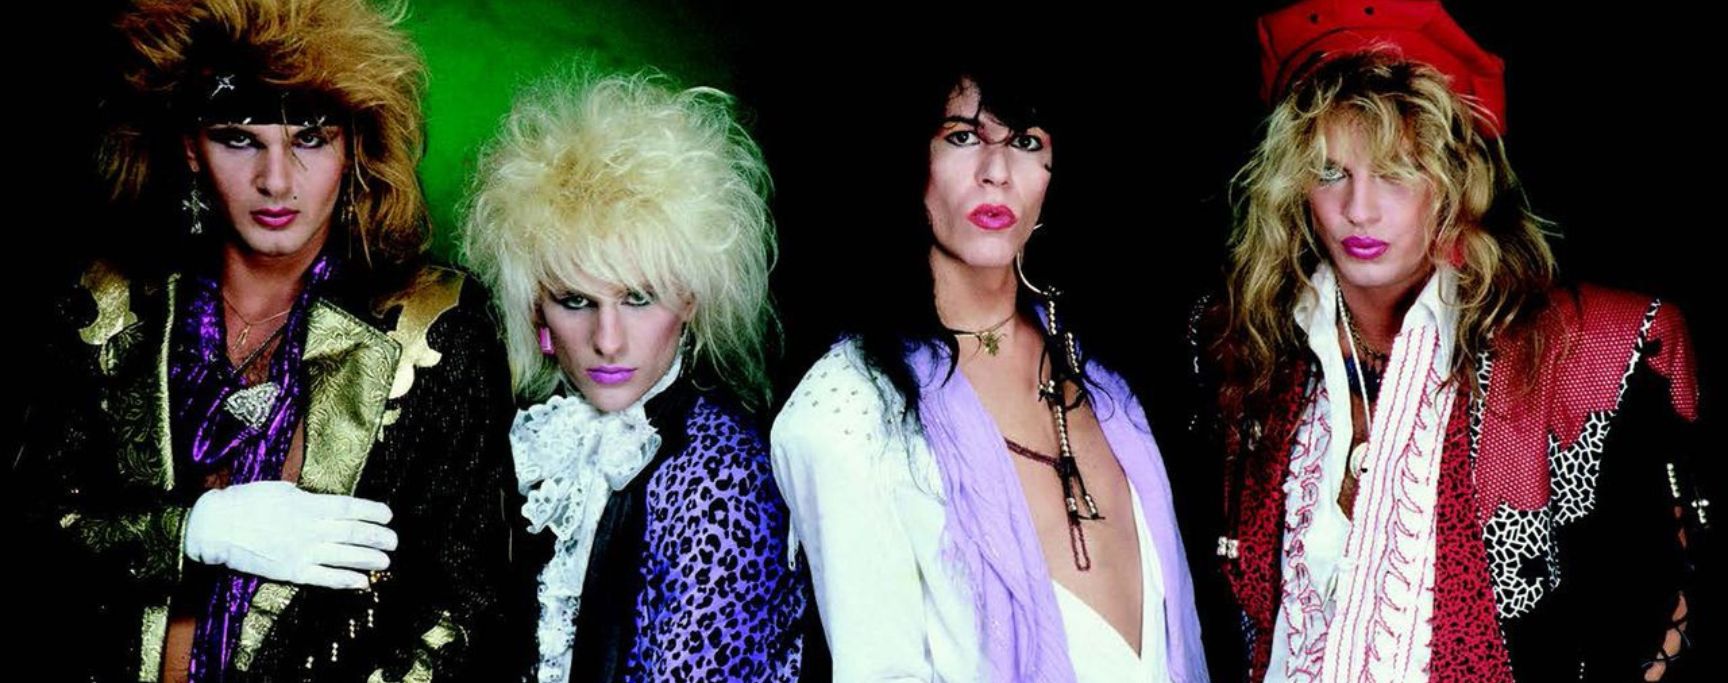 glam rock groupe